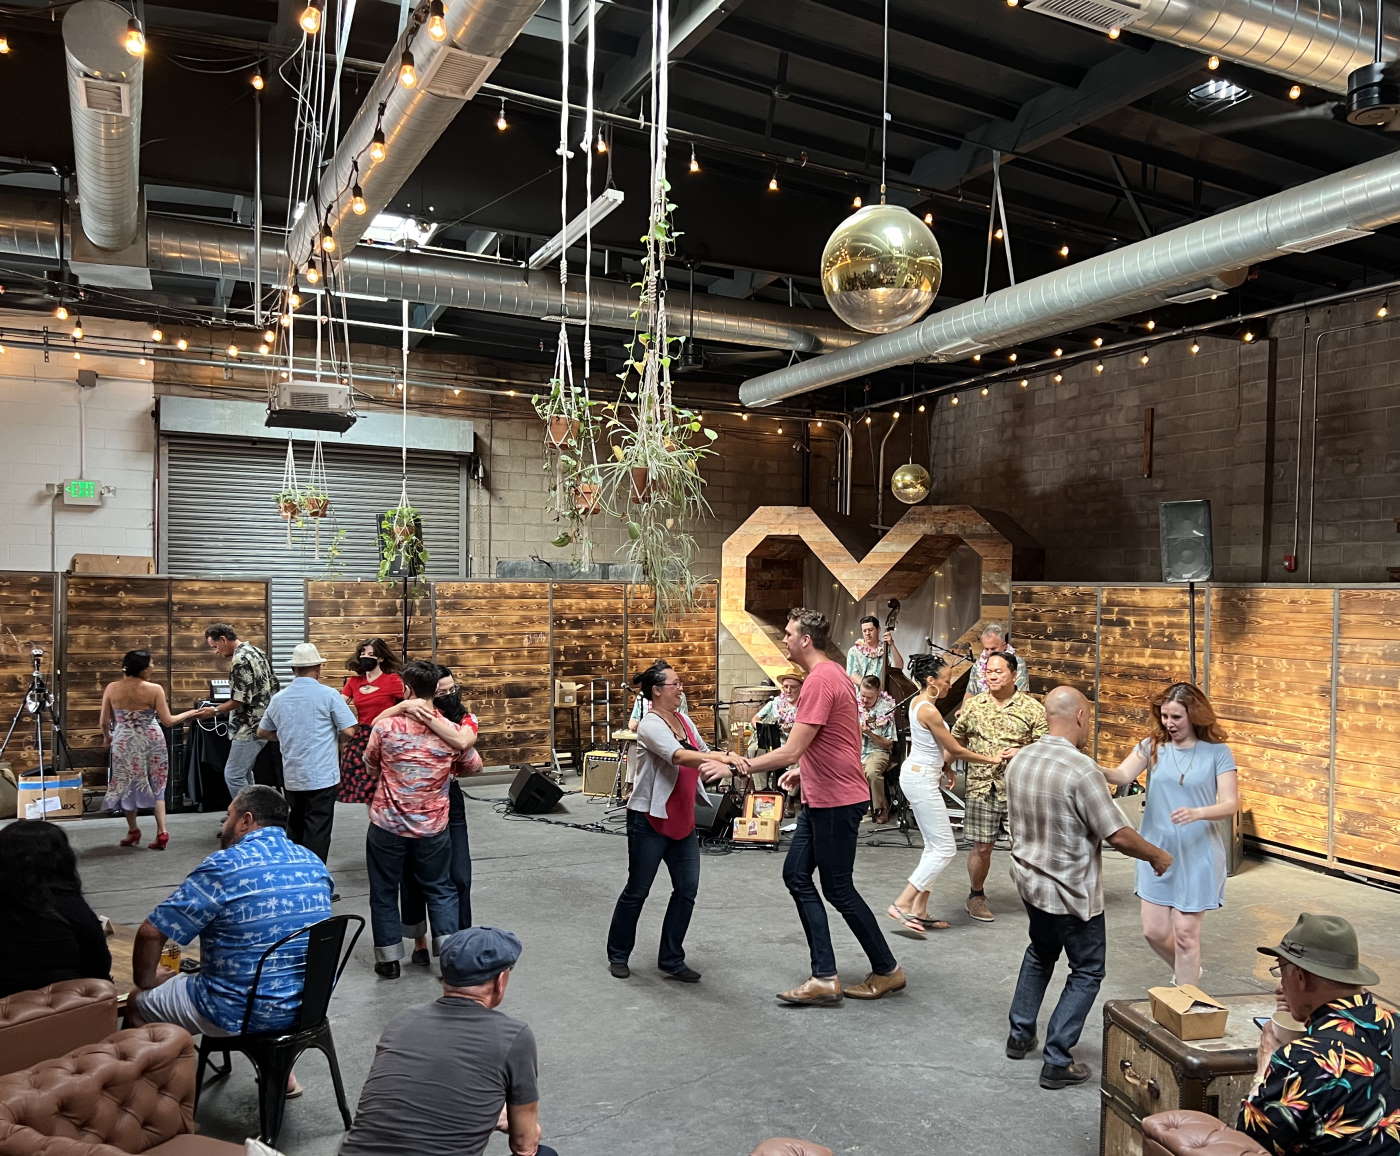 Swing dancing at the Boomtown Brewery in the Arts District